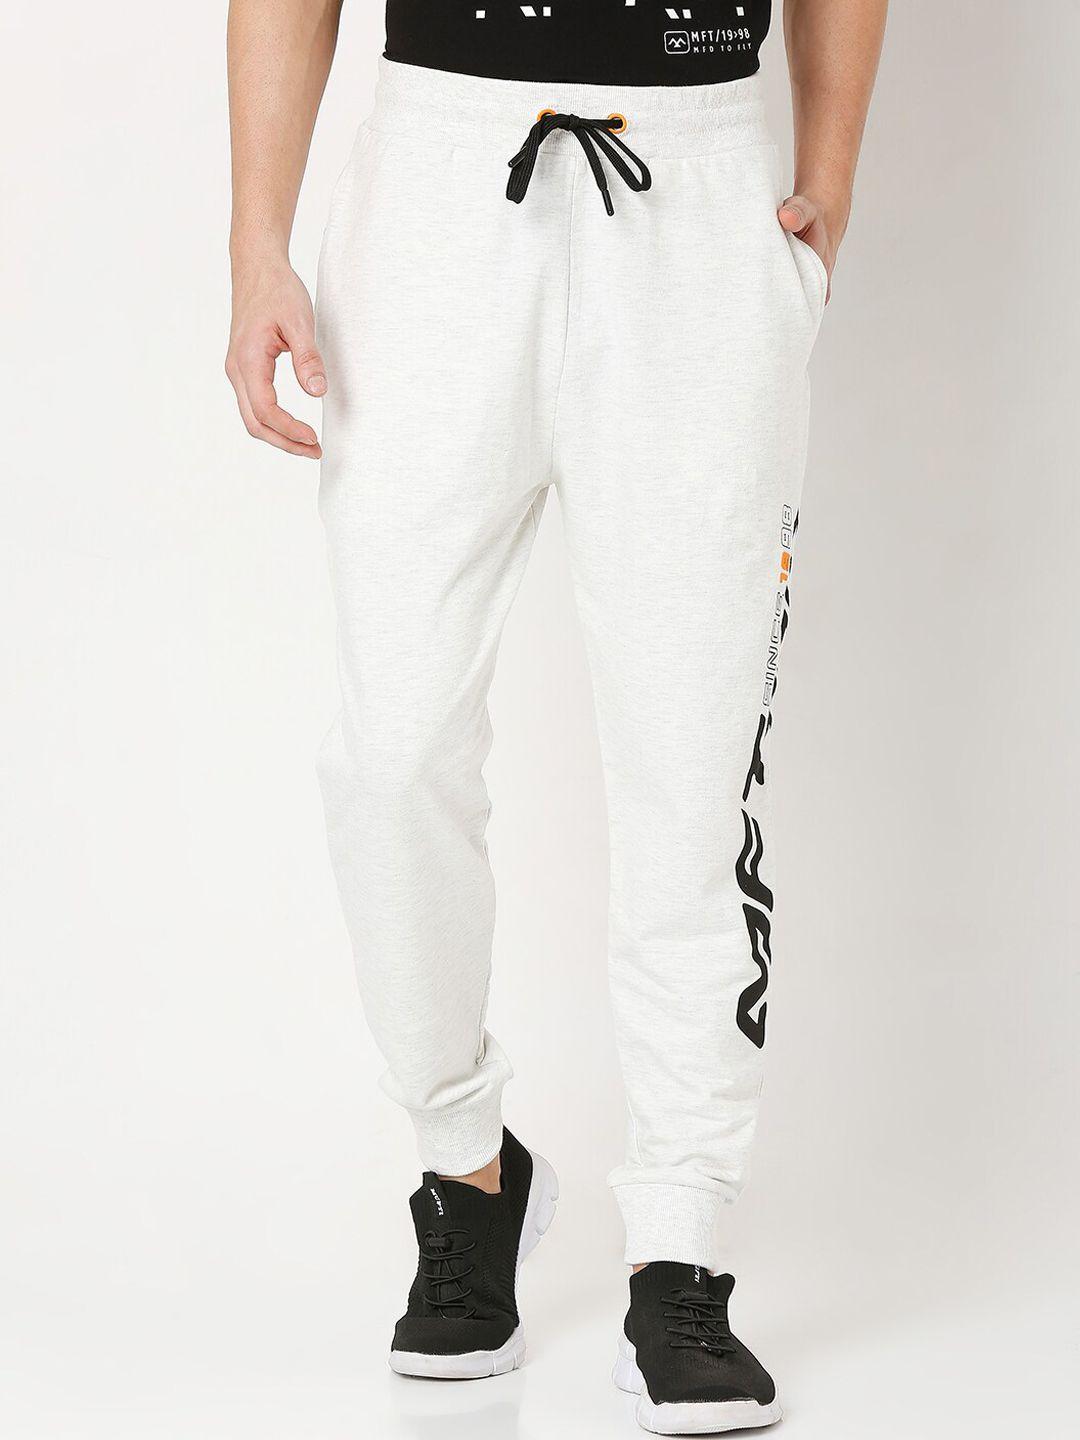 mufti-men-grey-loose-fit-joggers-trousers